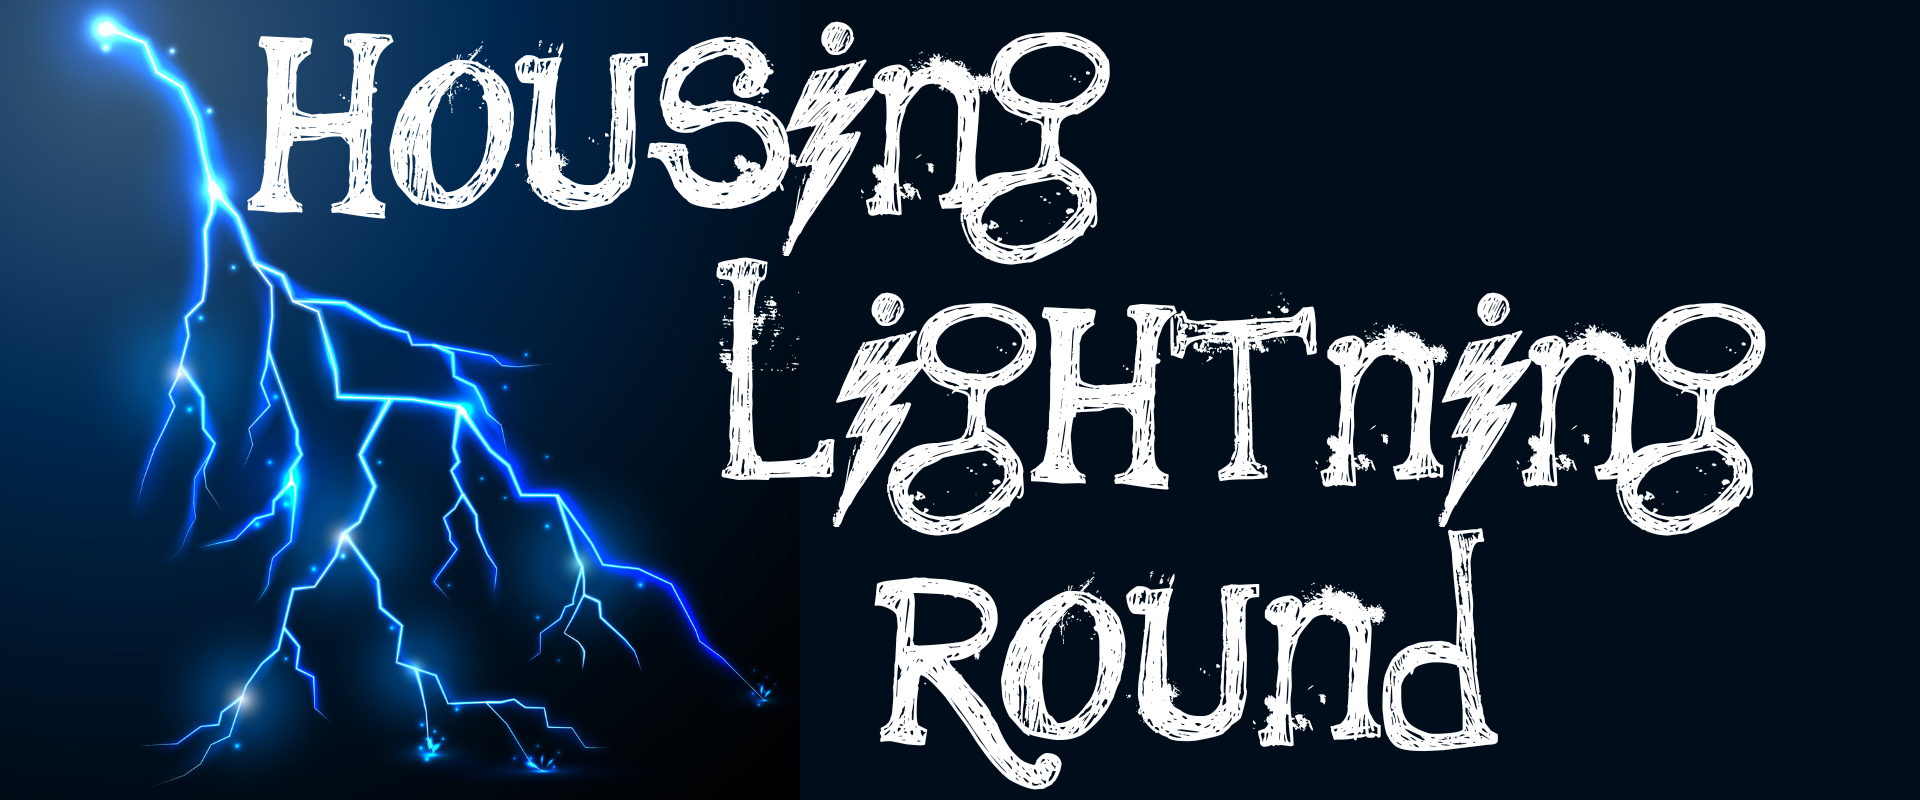 lightning in sky with text that says "Housing Lightning Round"